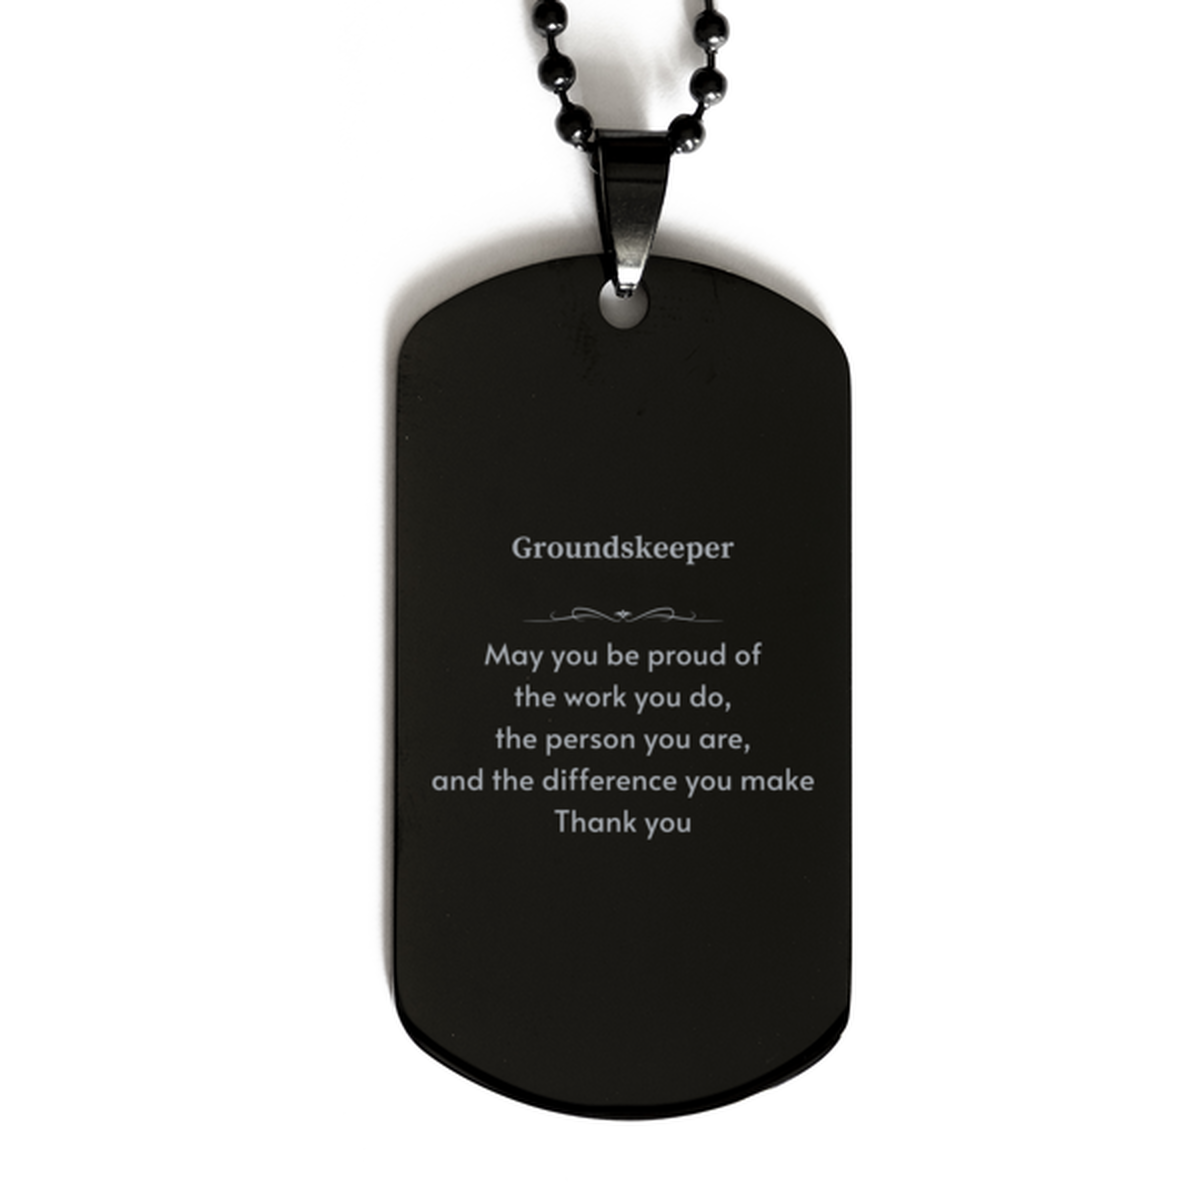 Heartwarming Black Dog Tag Retirement Coworkers Gifts for Groundskeeper, Groundskeeper May You be proud of the work you do, the person you are Gifts for Boss Men Women Friends